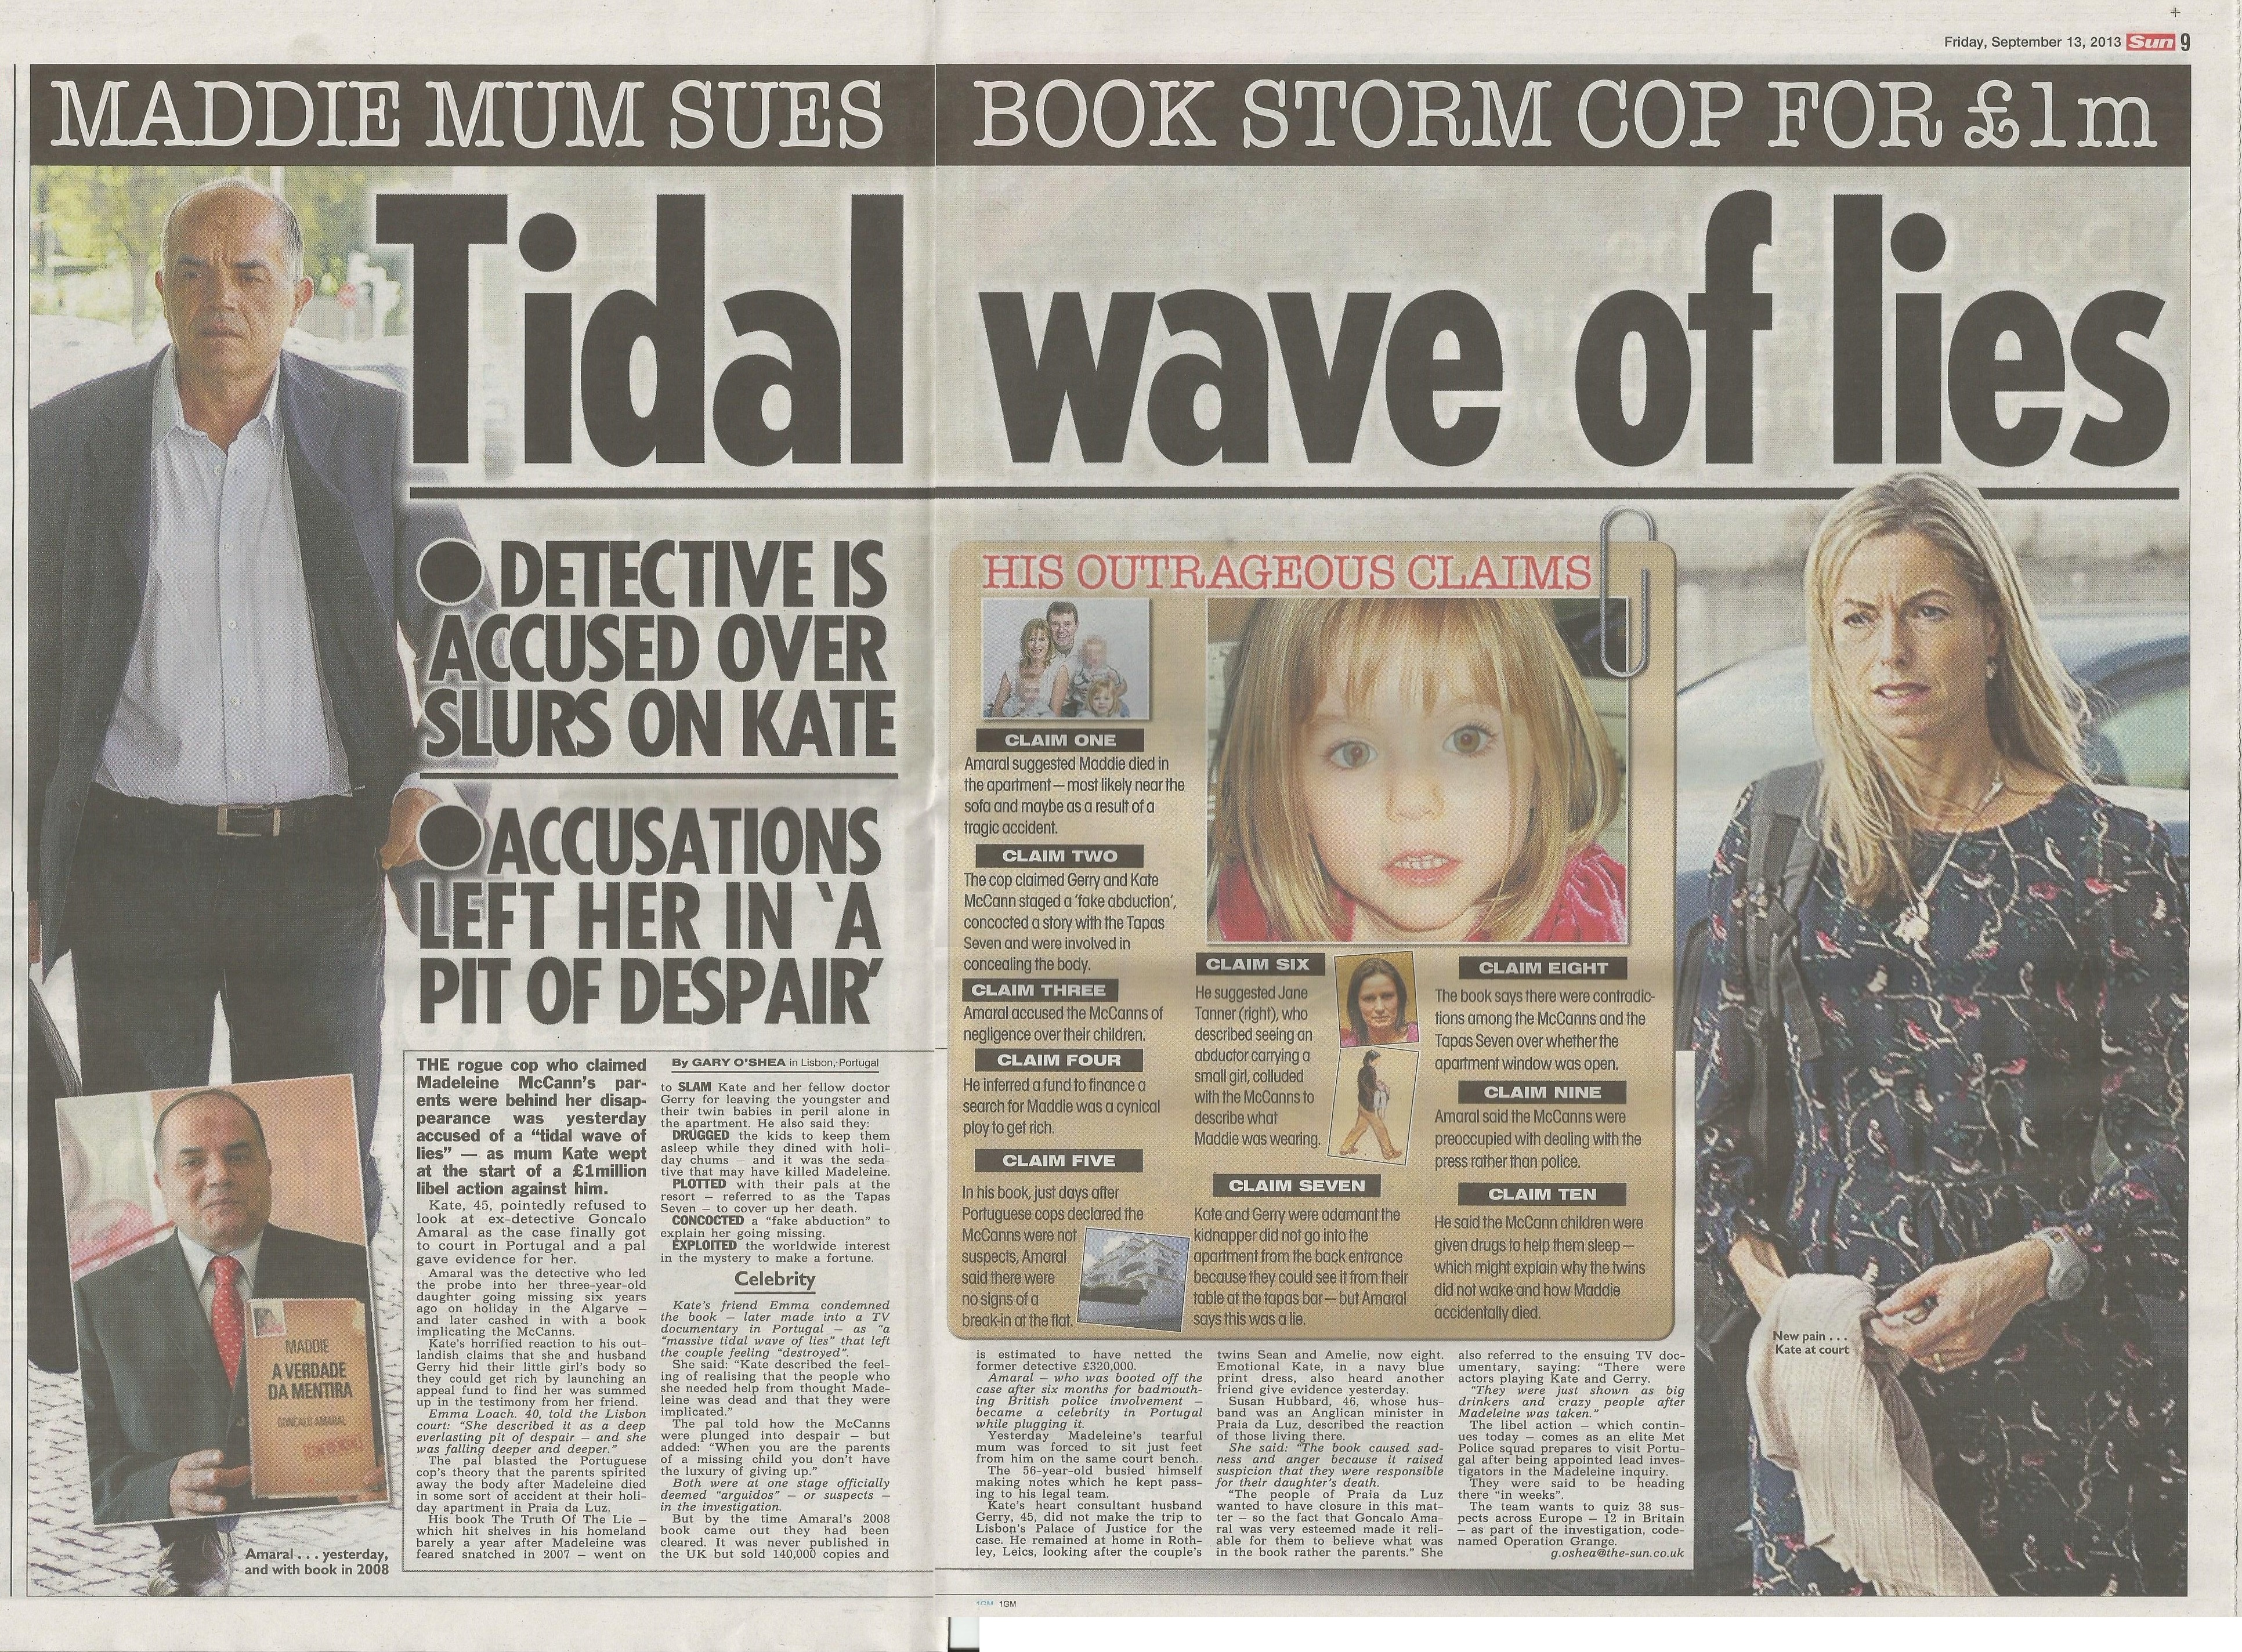 'Tidal wave of lies' - The Sun, paper edition, 13 September 2013